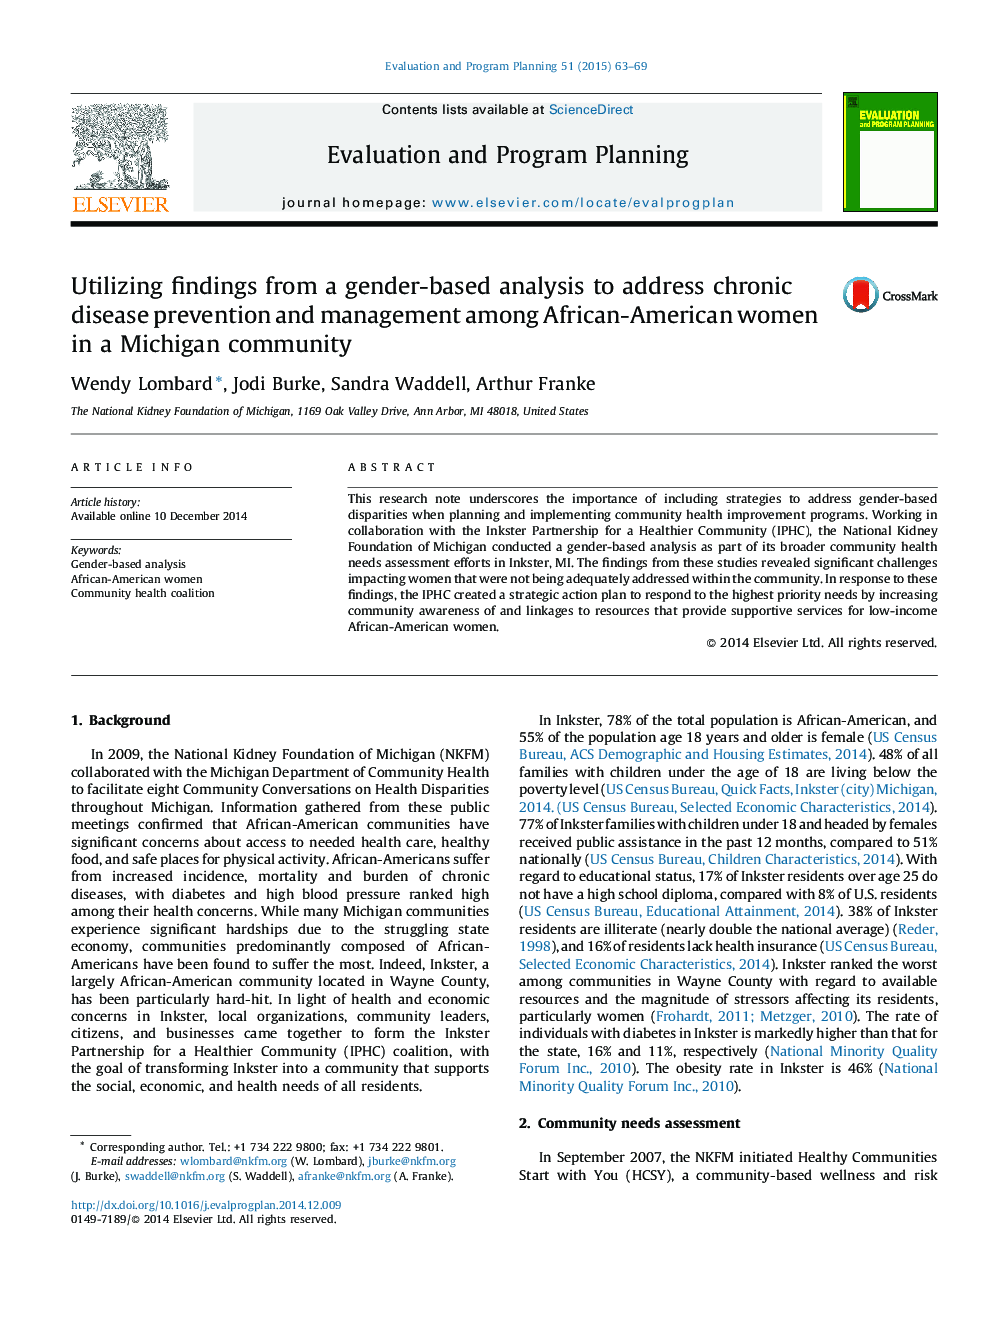 Utilizing findings from a gender-based analysis to address chronic disease prevention and management among African-American women in a Michigan community